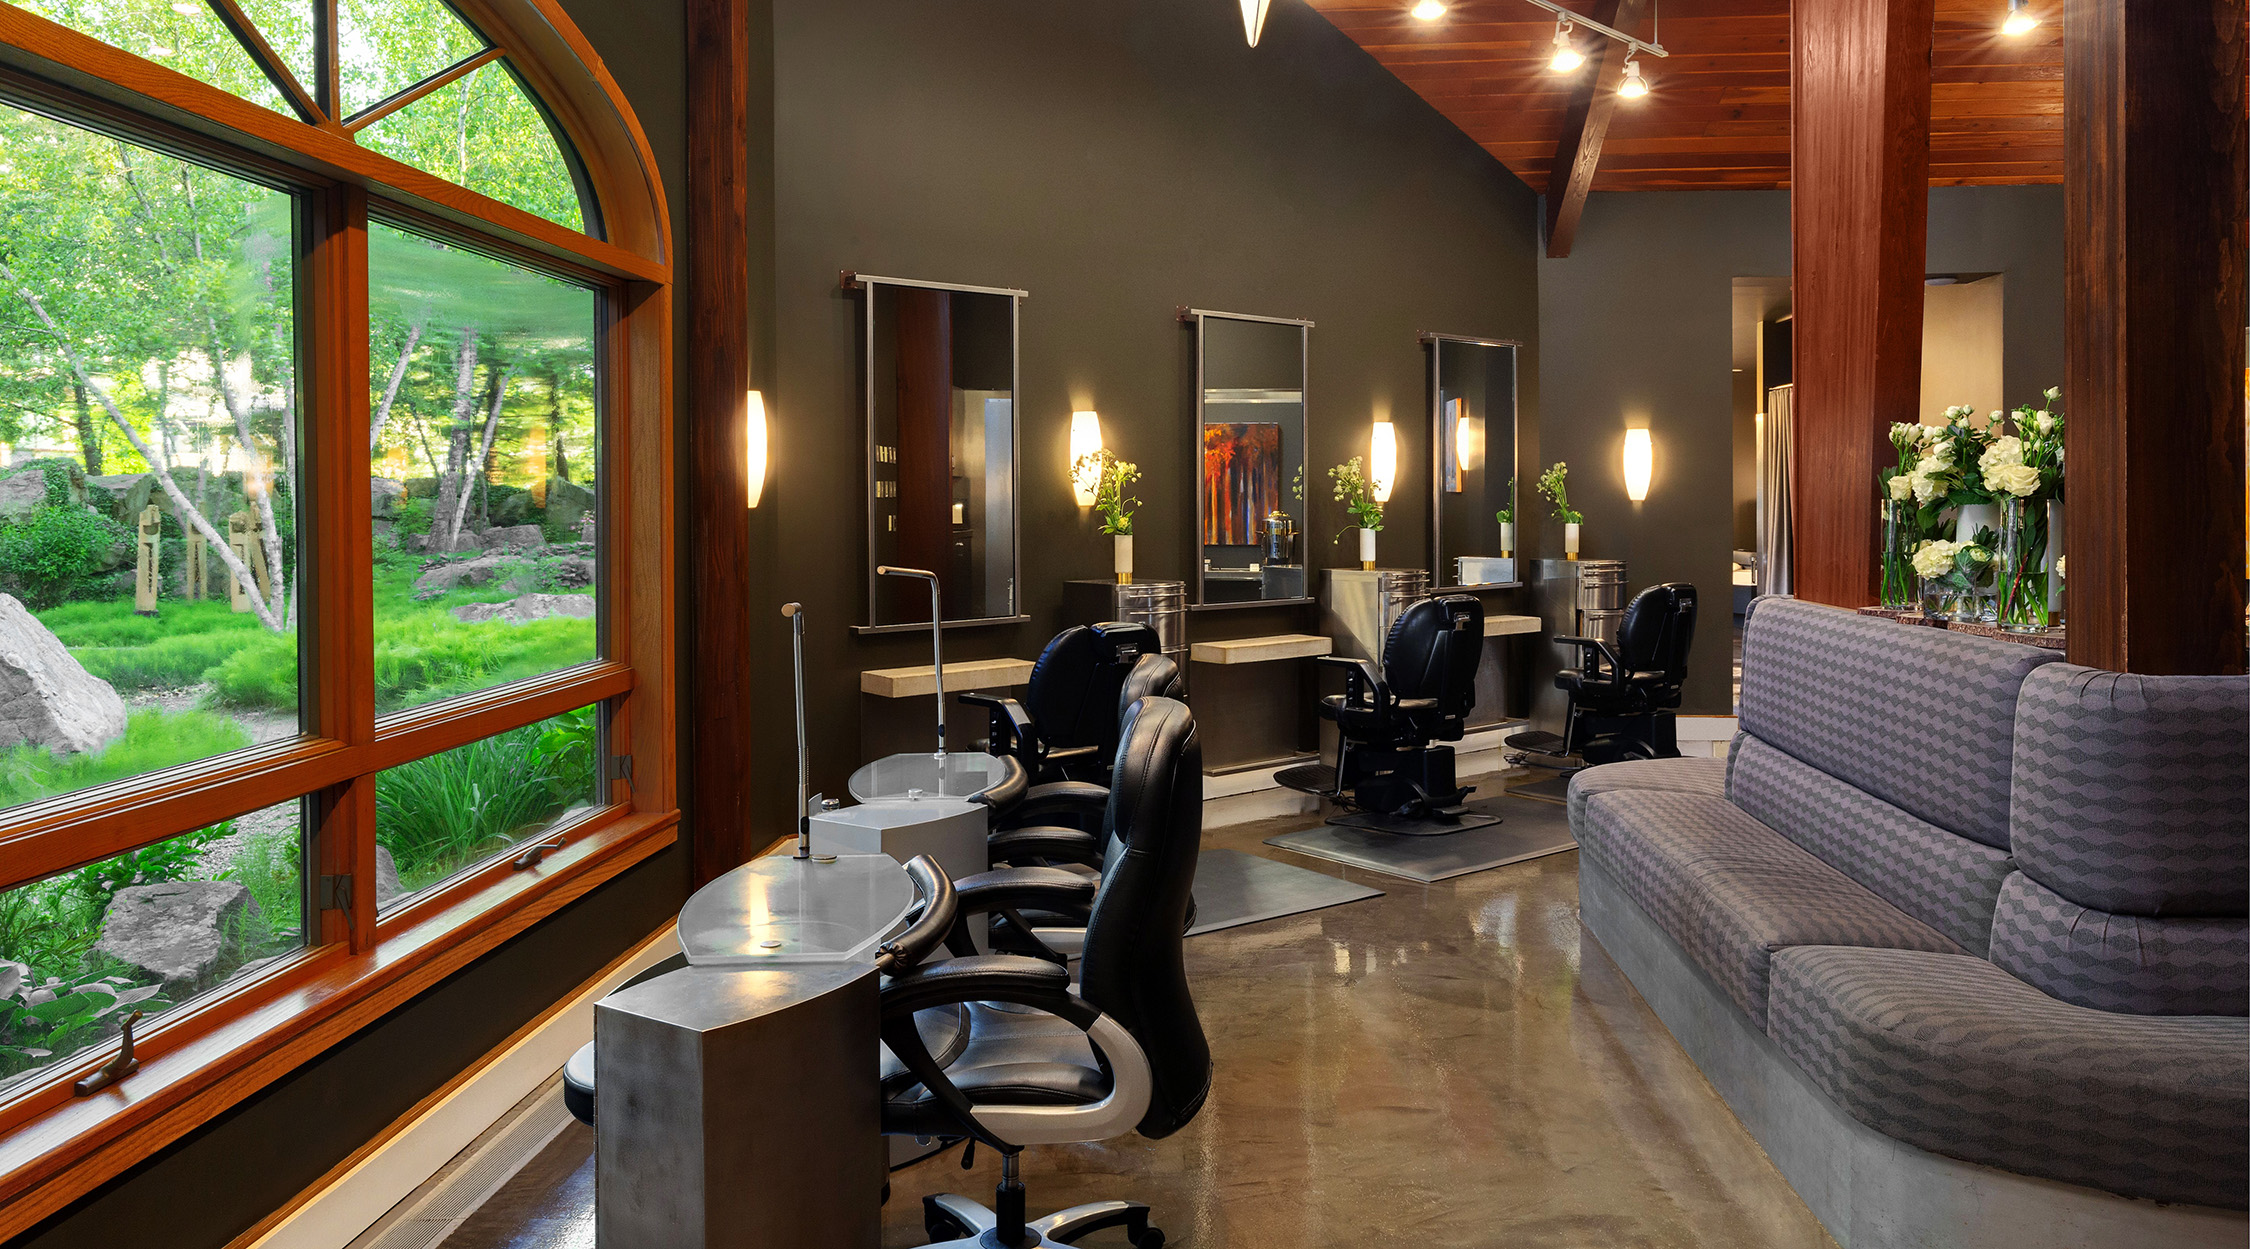 Woodlands Spa and Salon